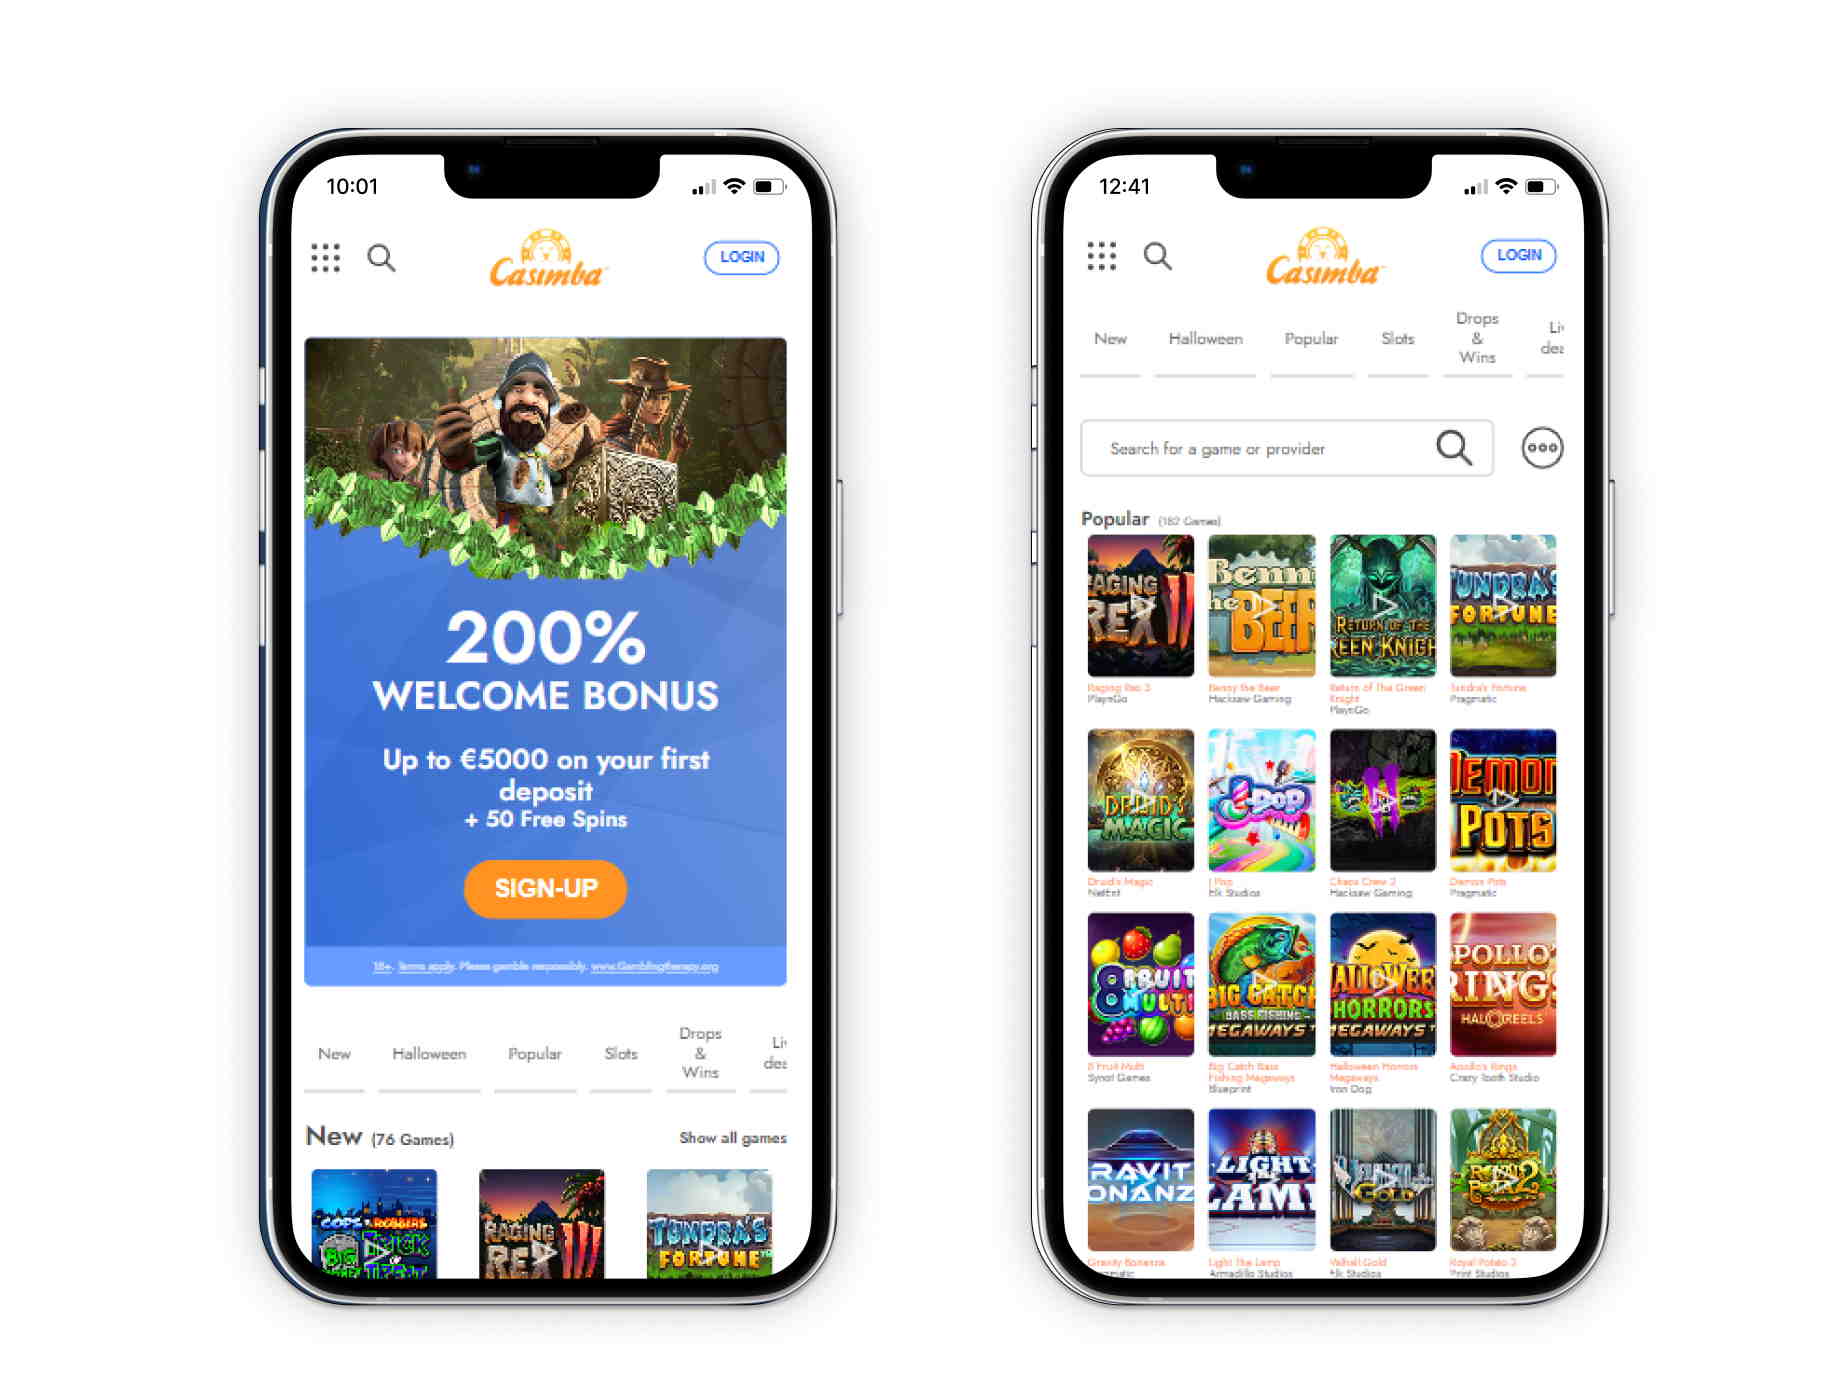 Casimba casino's landing page and game lobby in a mobile viewport